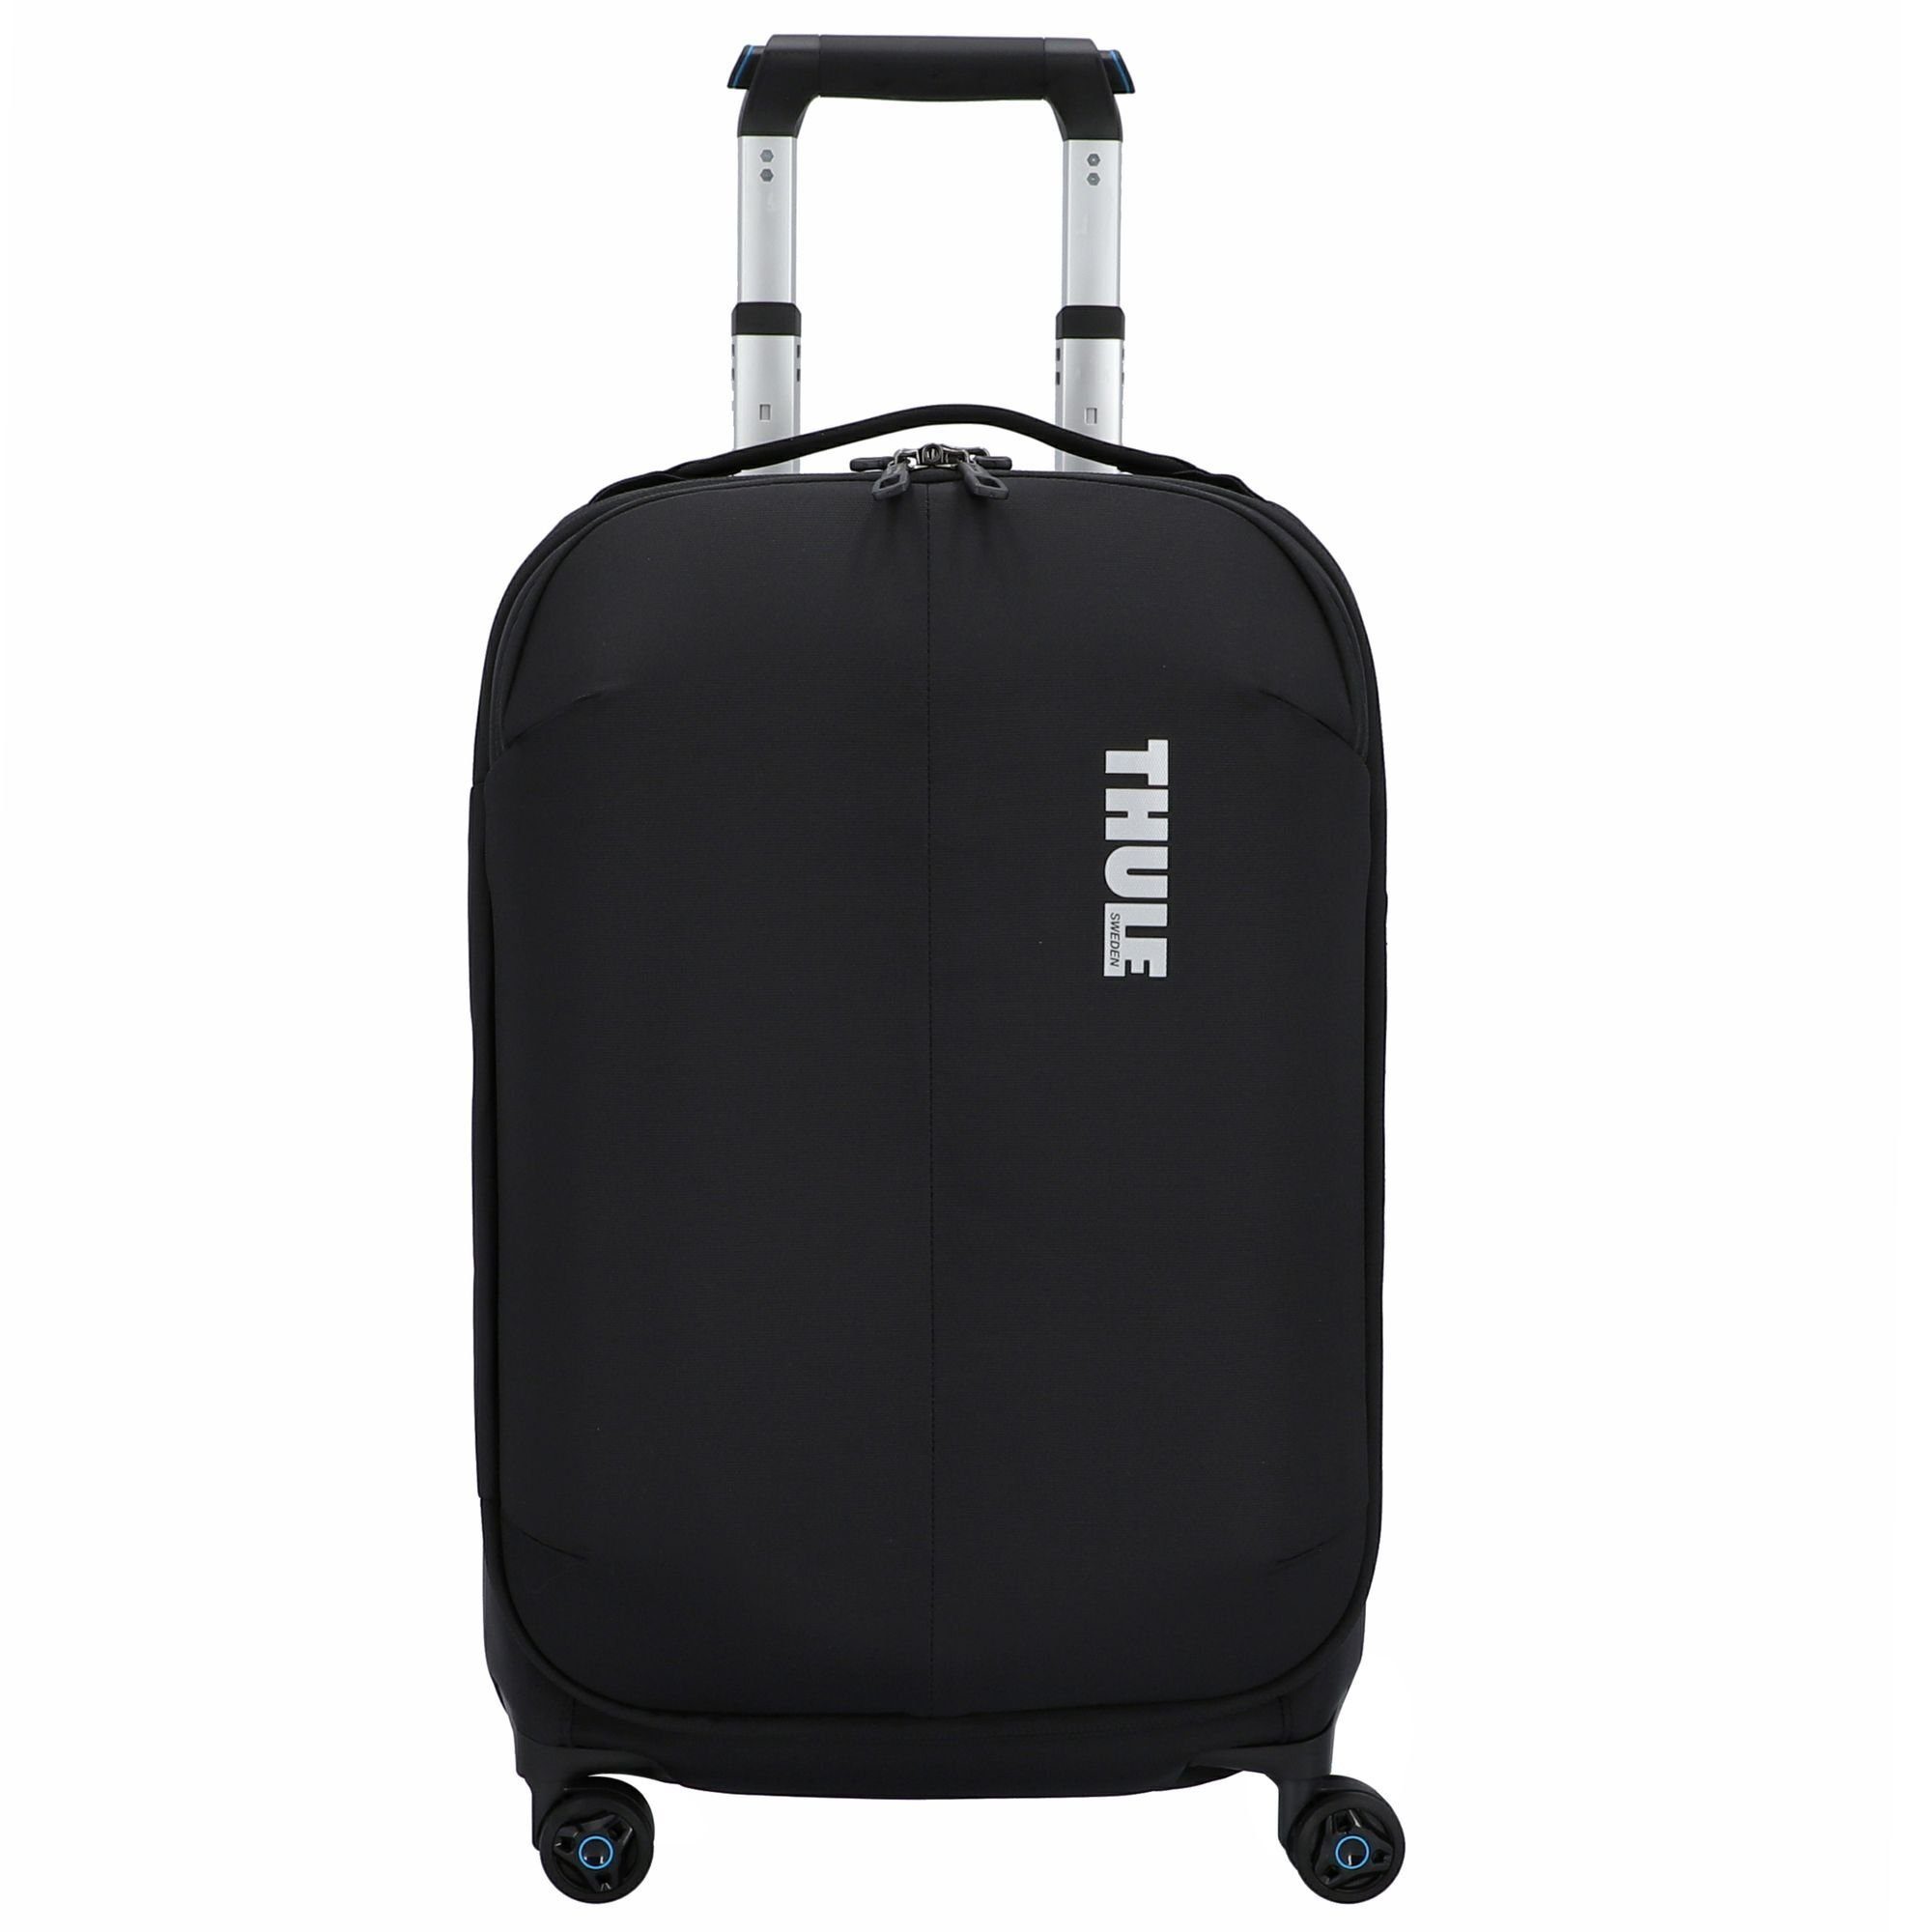 Thule Trolley Subterra Carry On Spinner